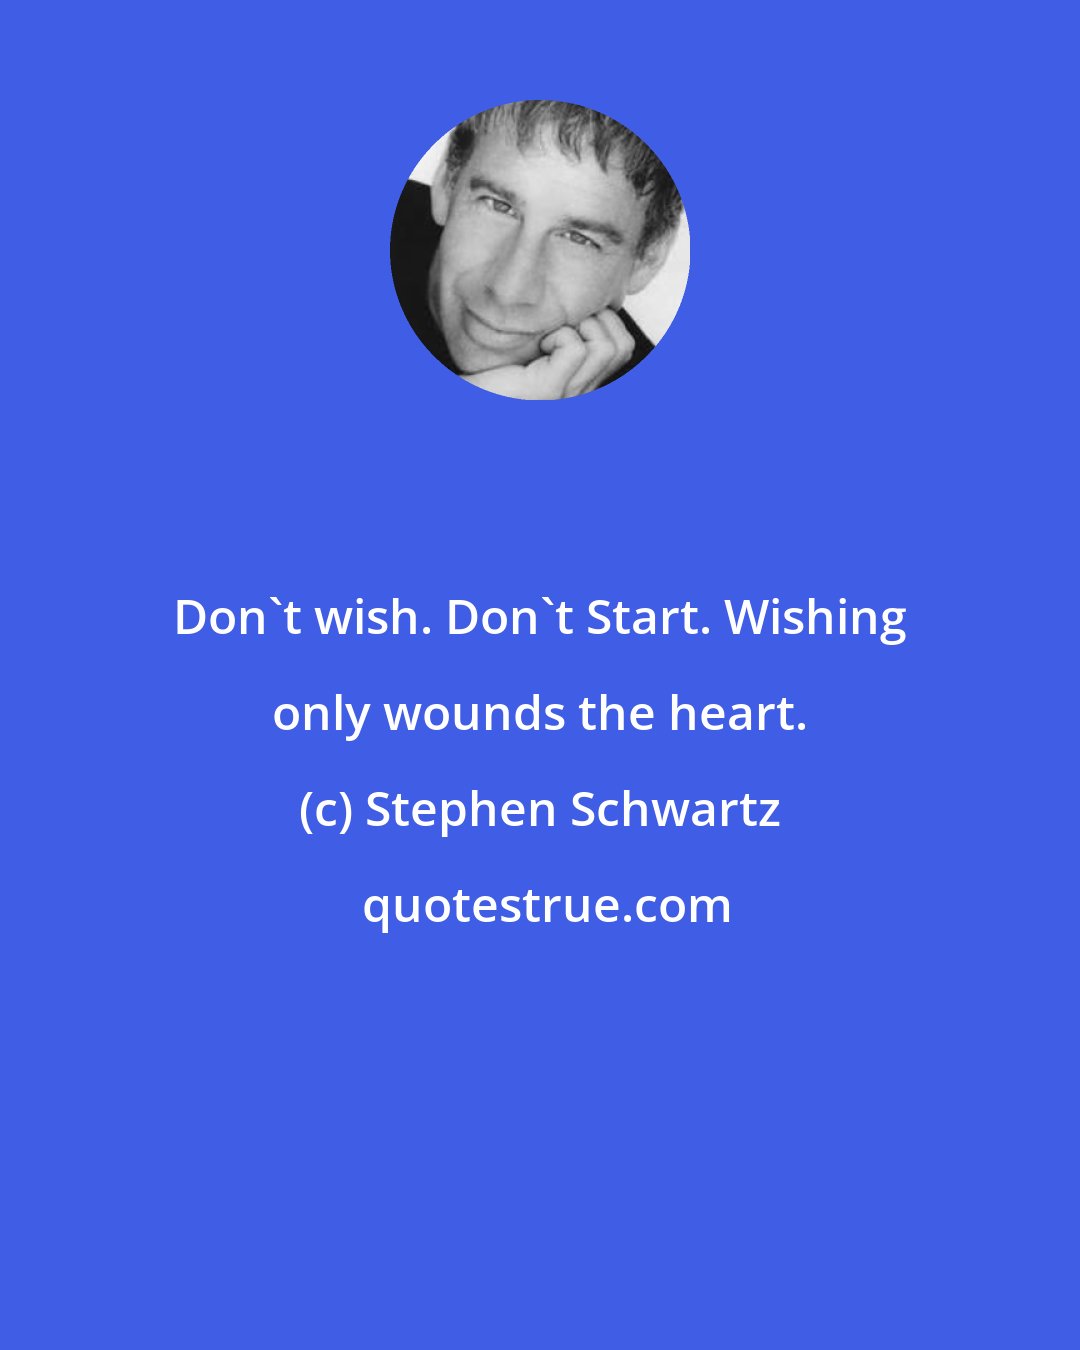 Stephen Schwartz: Don't wish. Don't Start. Wishing only wounds the heart.